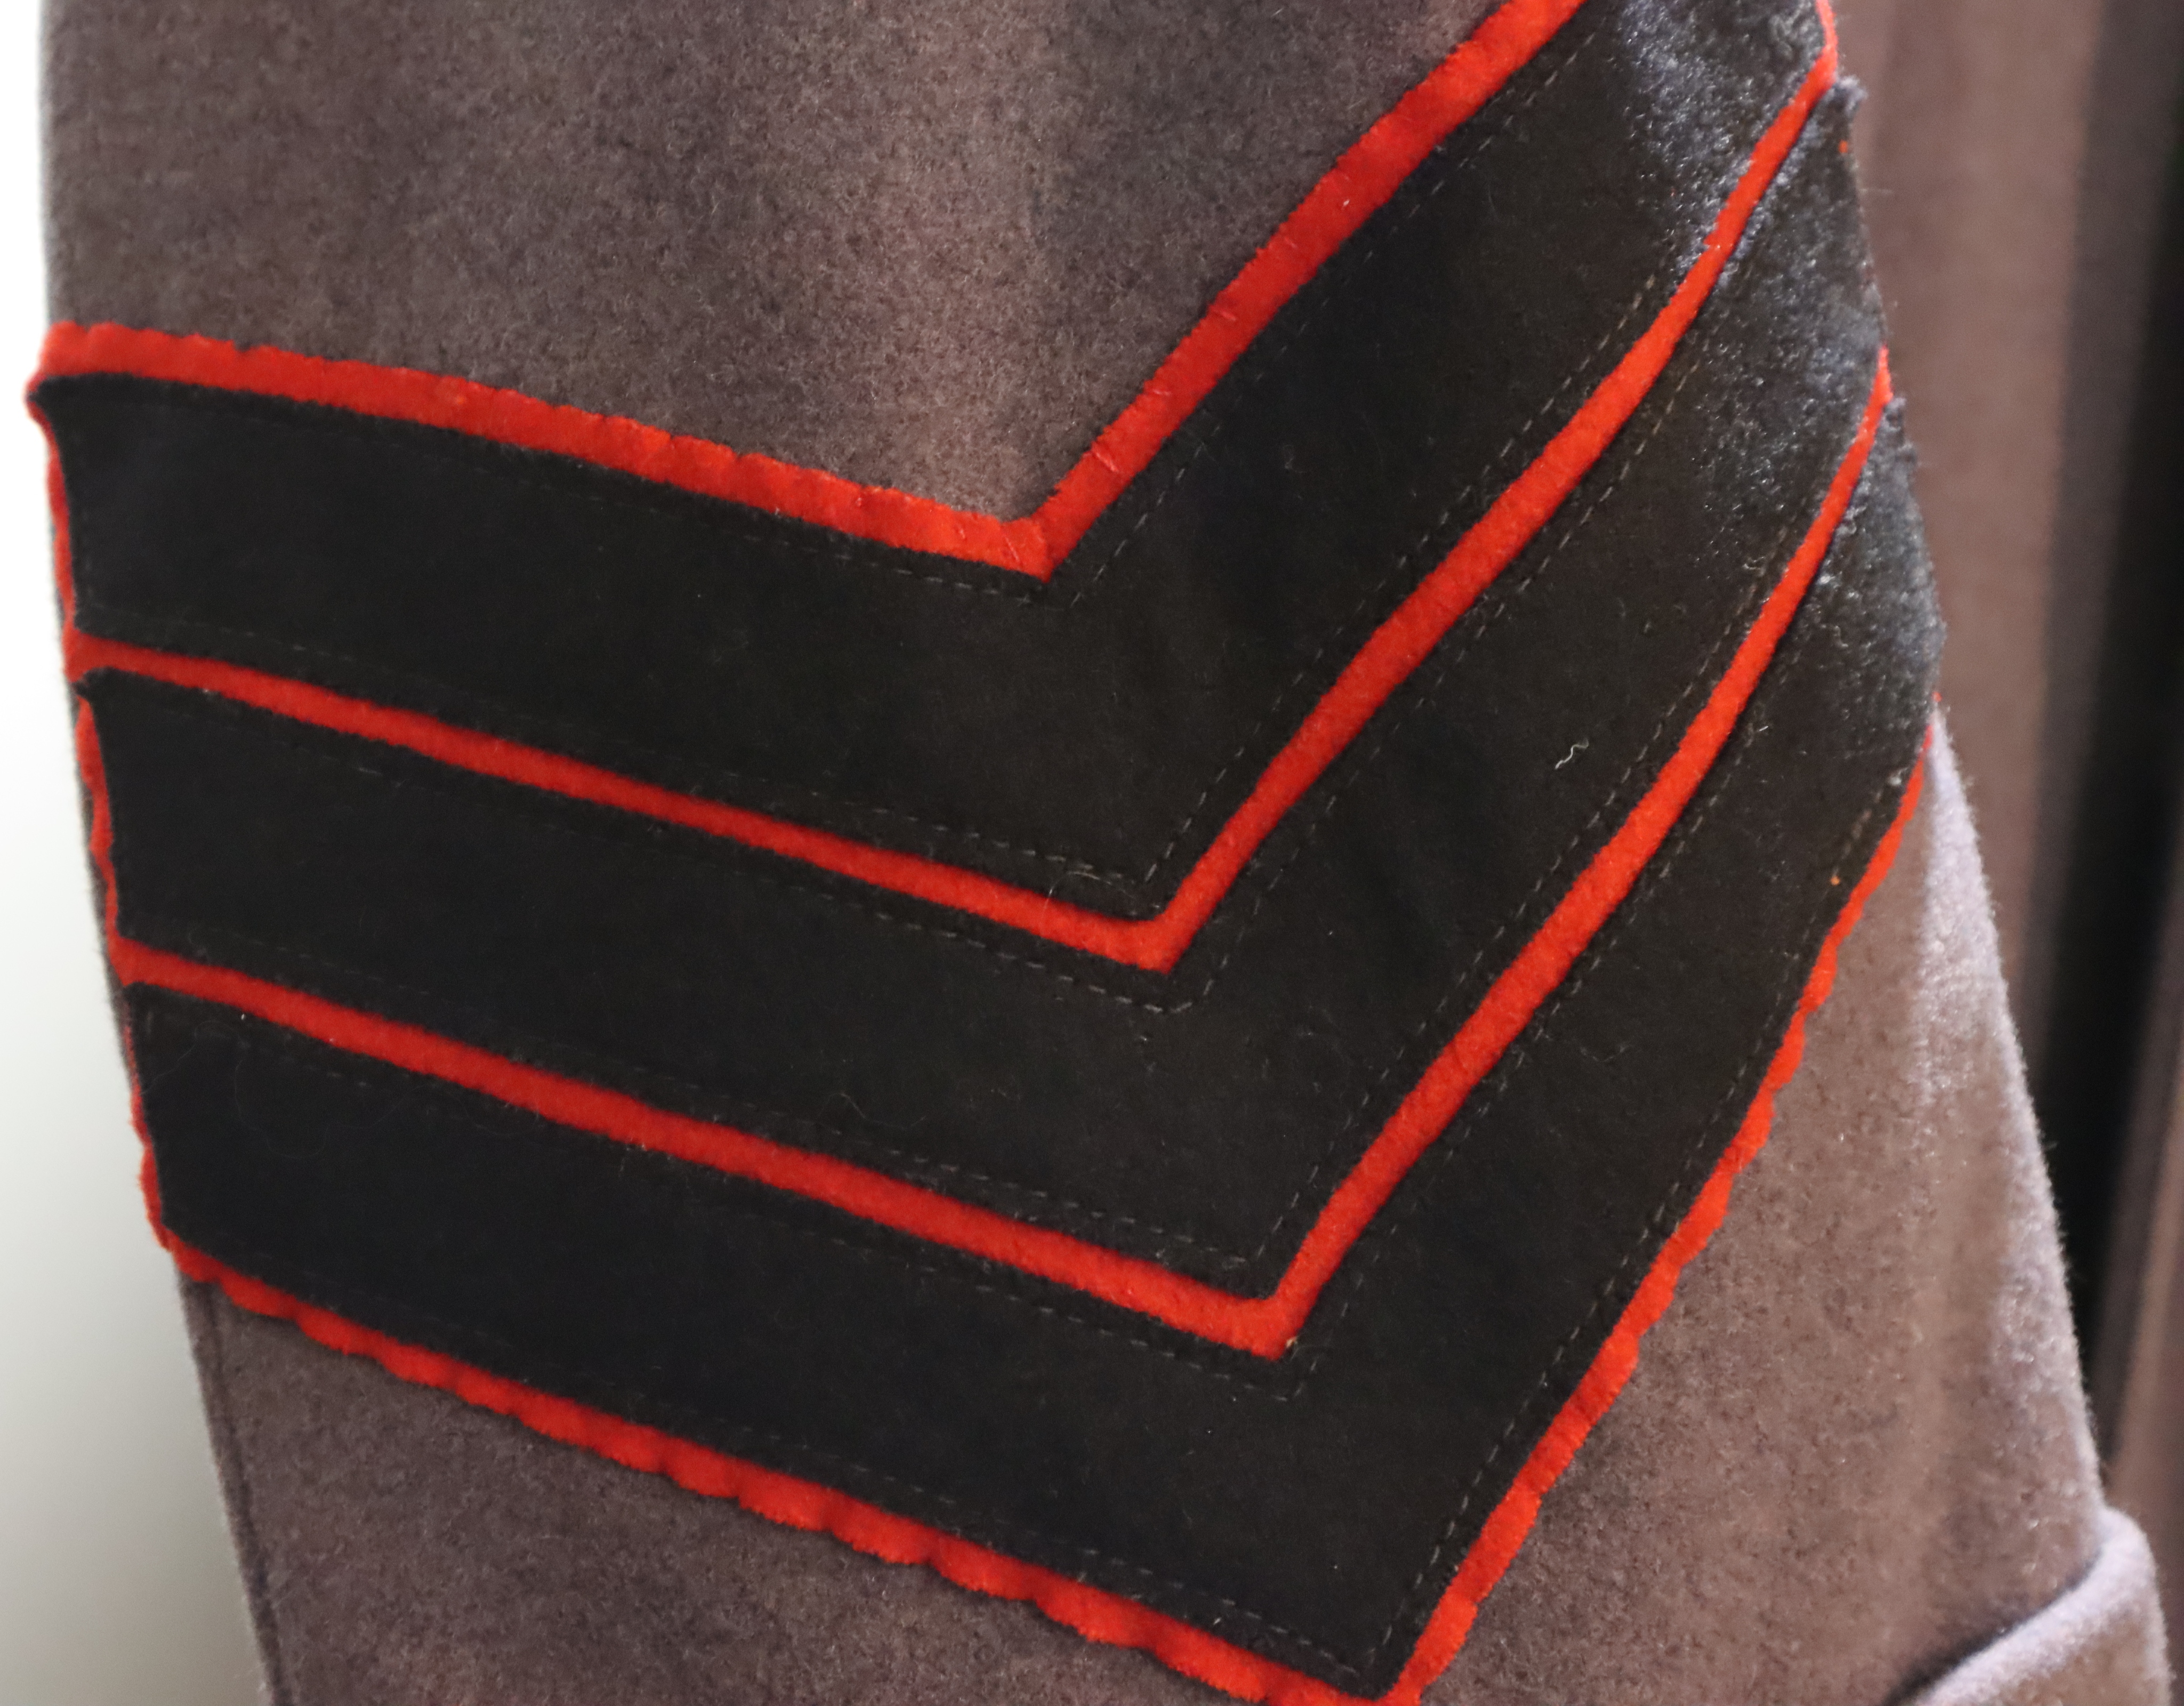 Grenadier Guards grey overcoat with sergeant stripes to right arm. P&P Group 3 (£25+VAT for the - Image 2 of 4